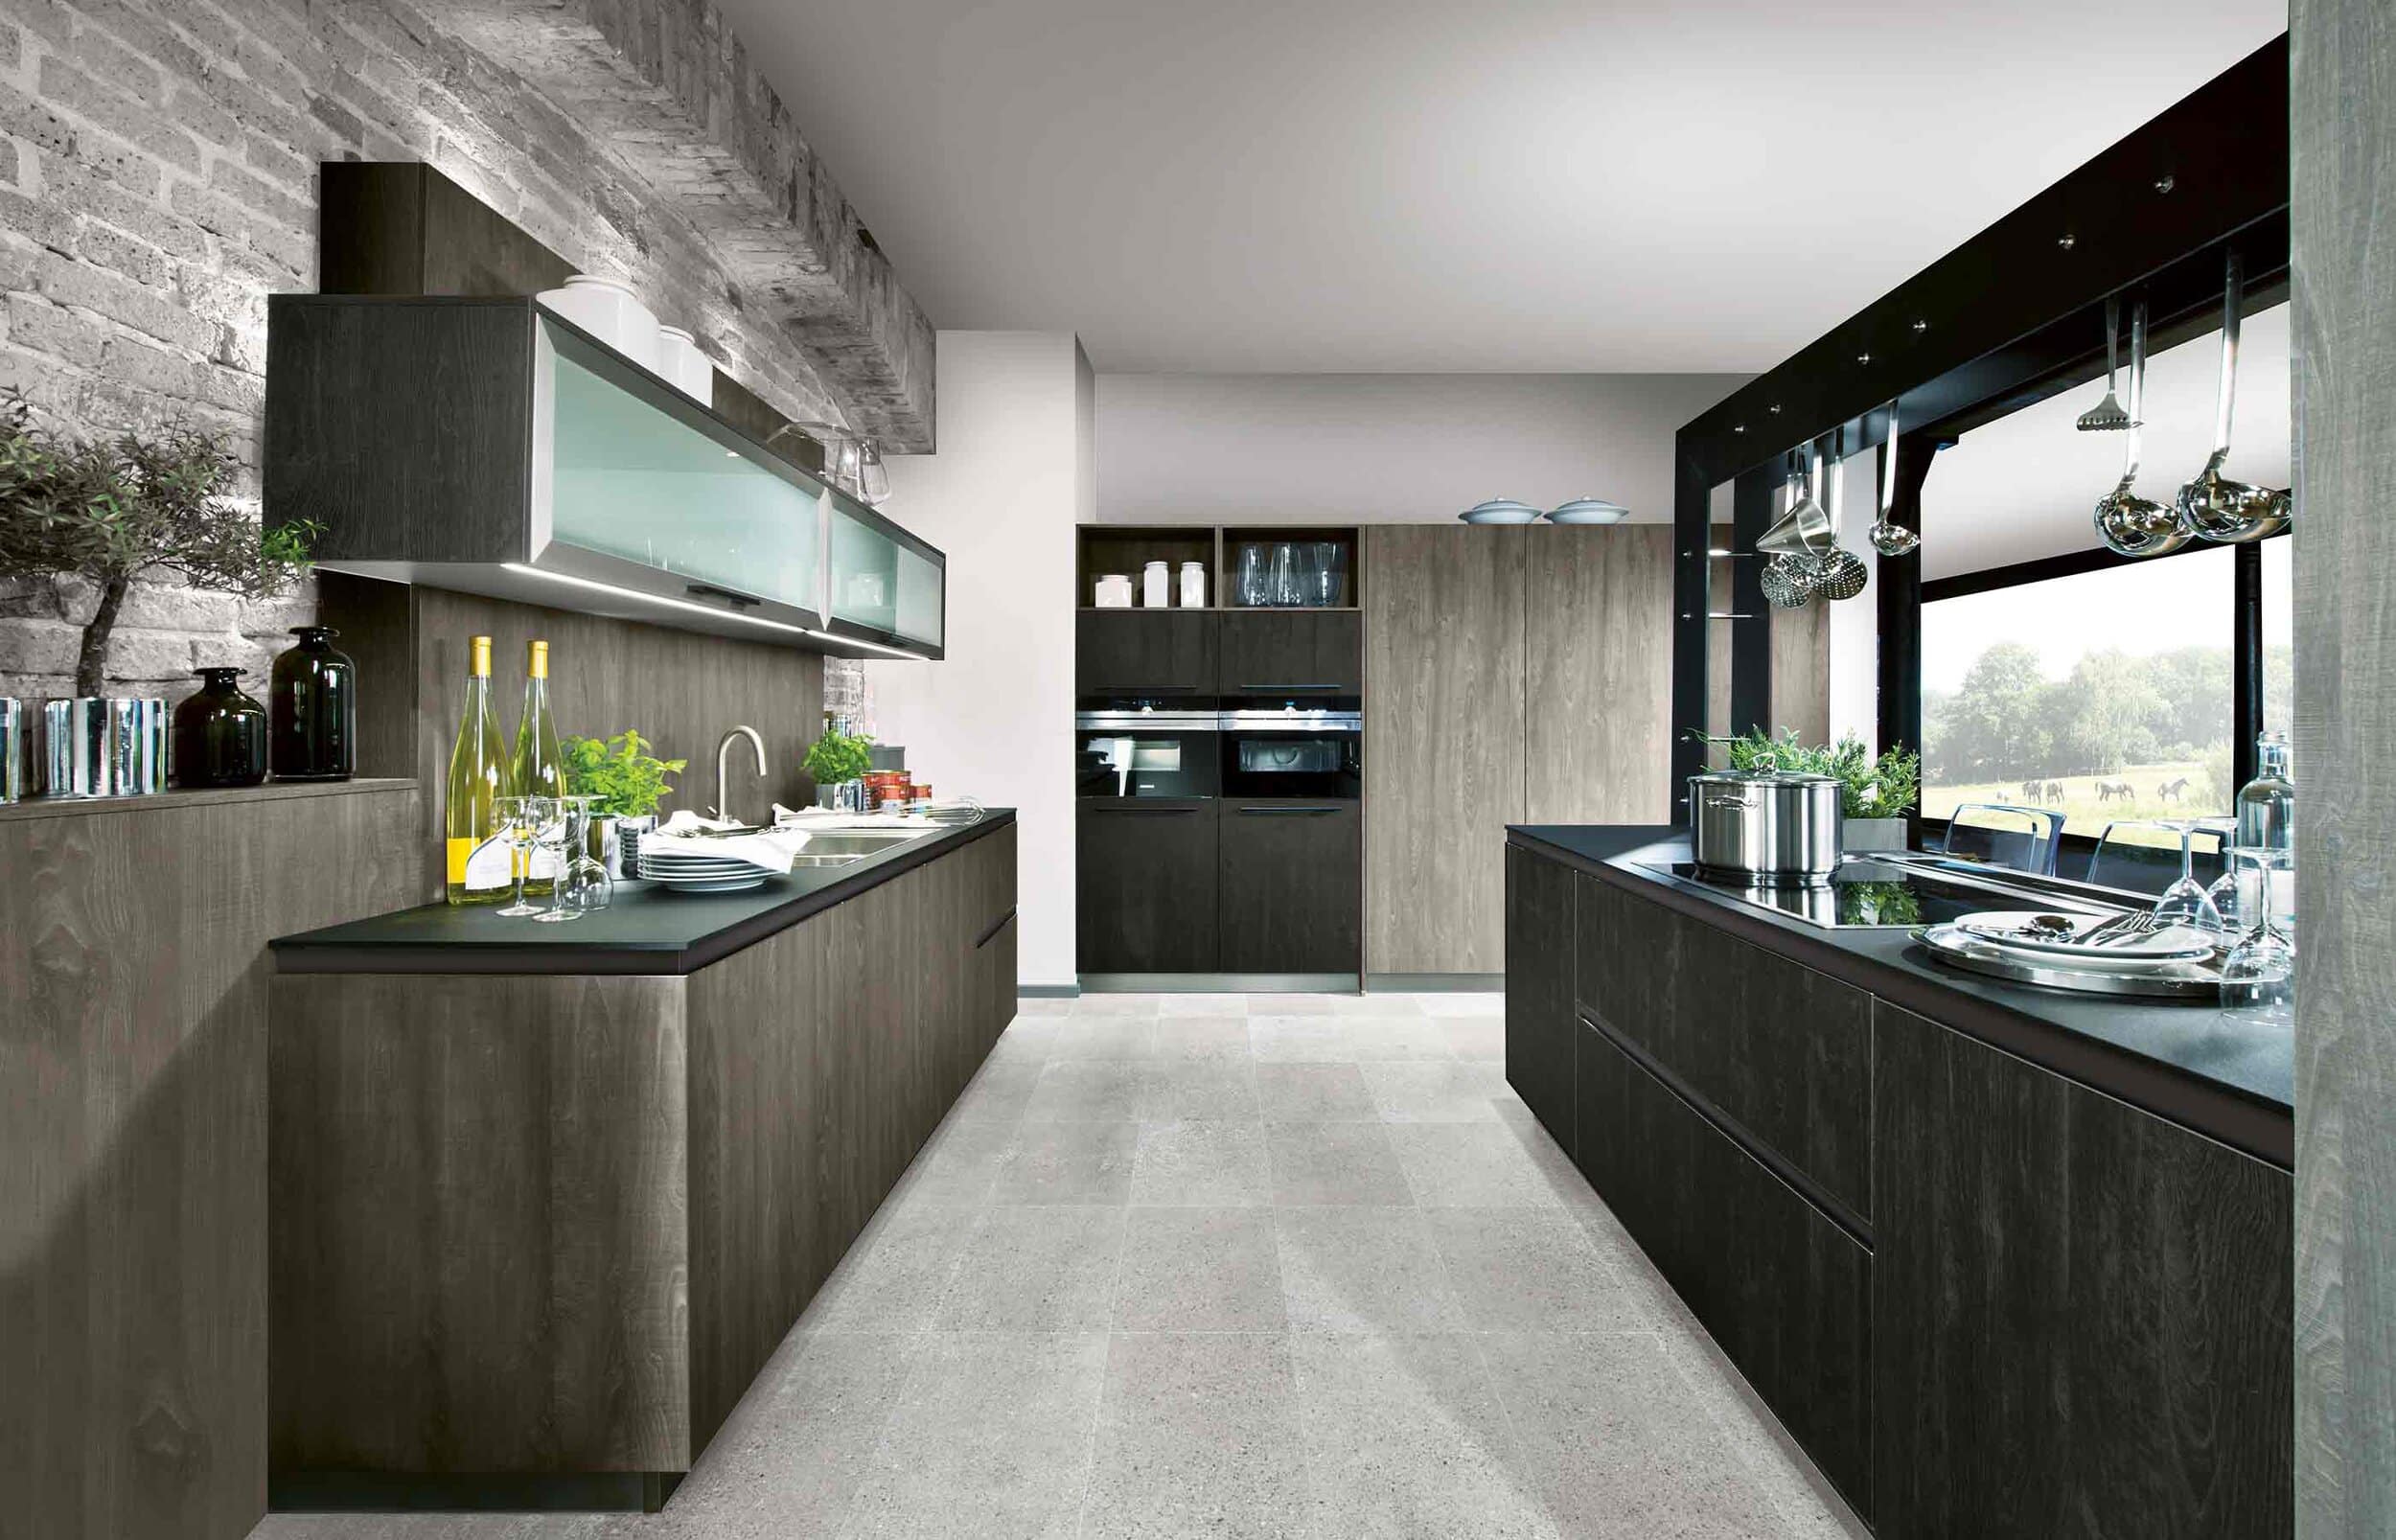 Enjoy modern German kitchens like this combination from Bauformat.